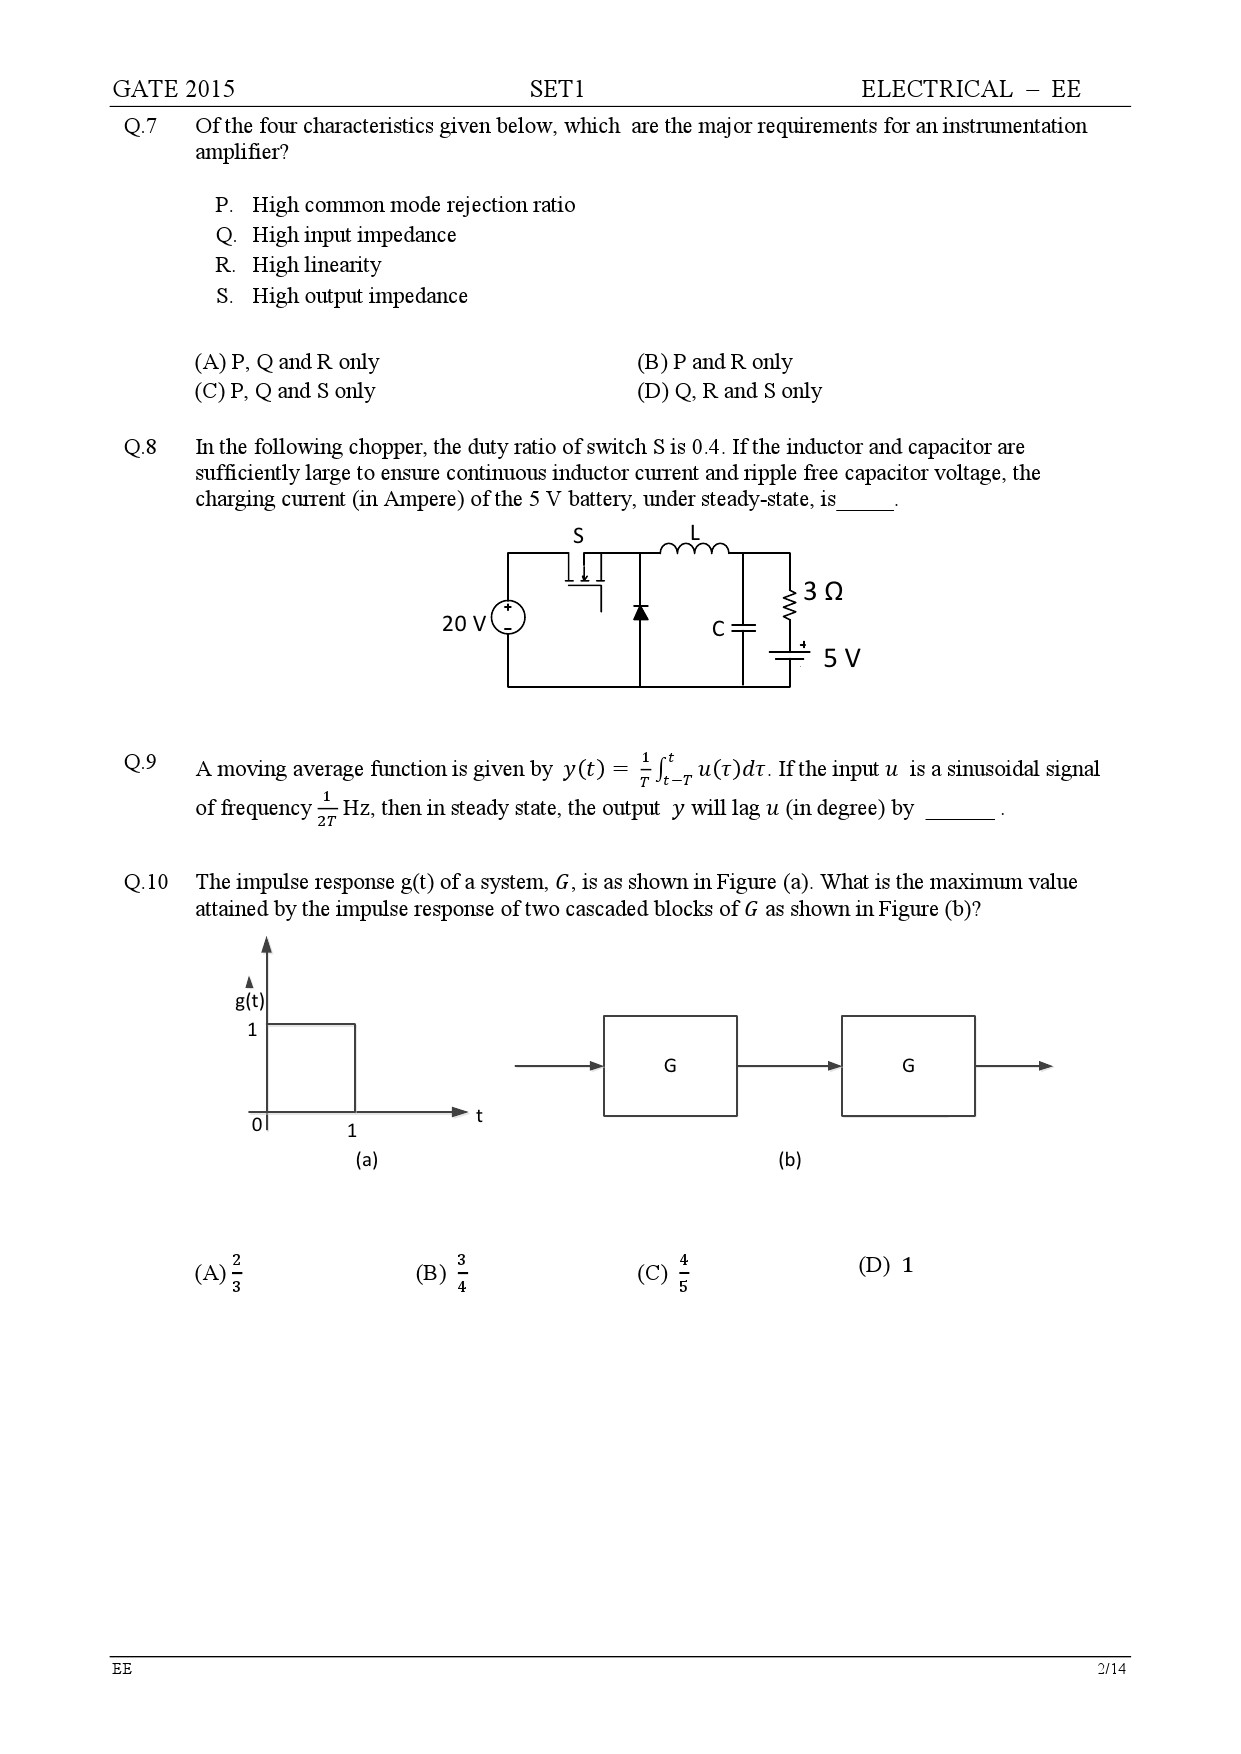 GATE Exam Question Paper 2015 Electrical Engineering Set 1 2